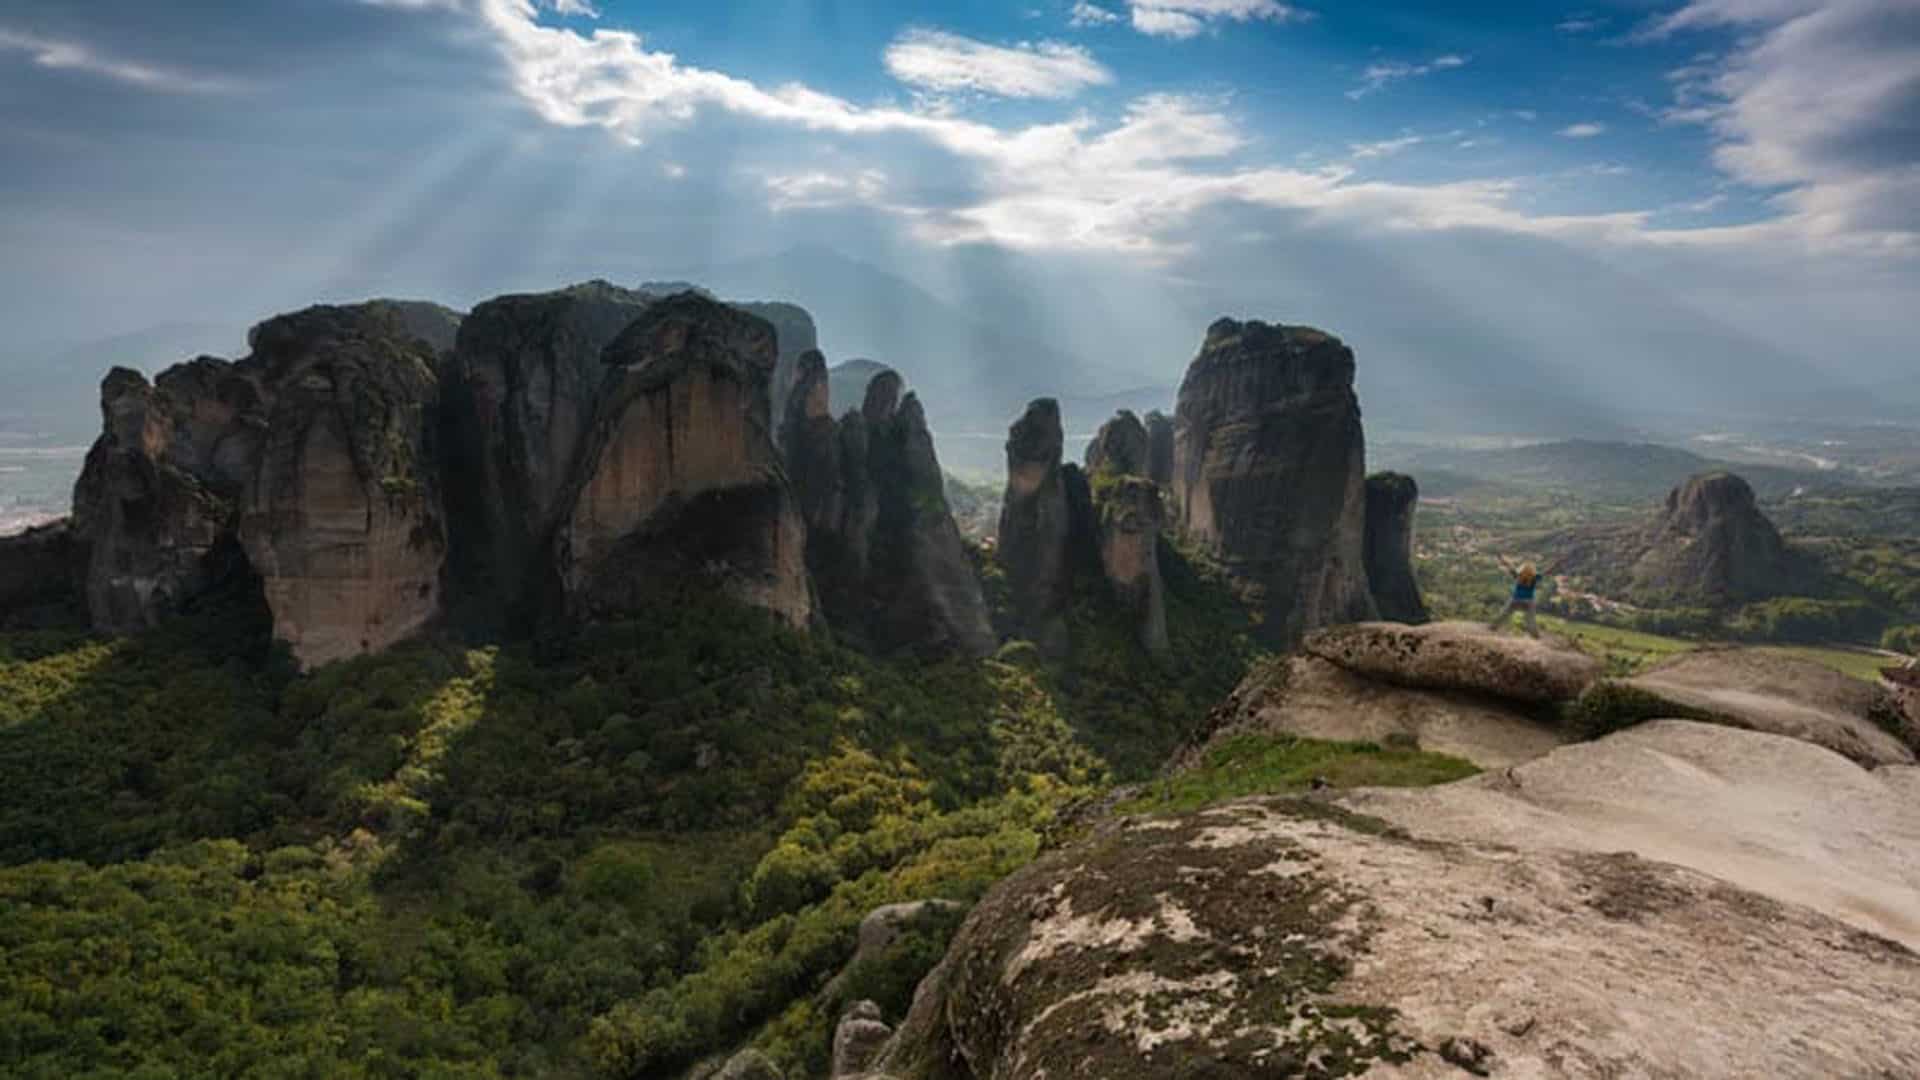 Superb viewpoints of Meteora along the road